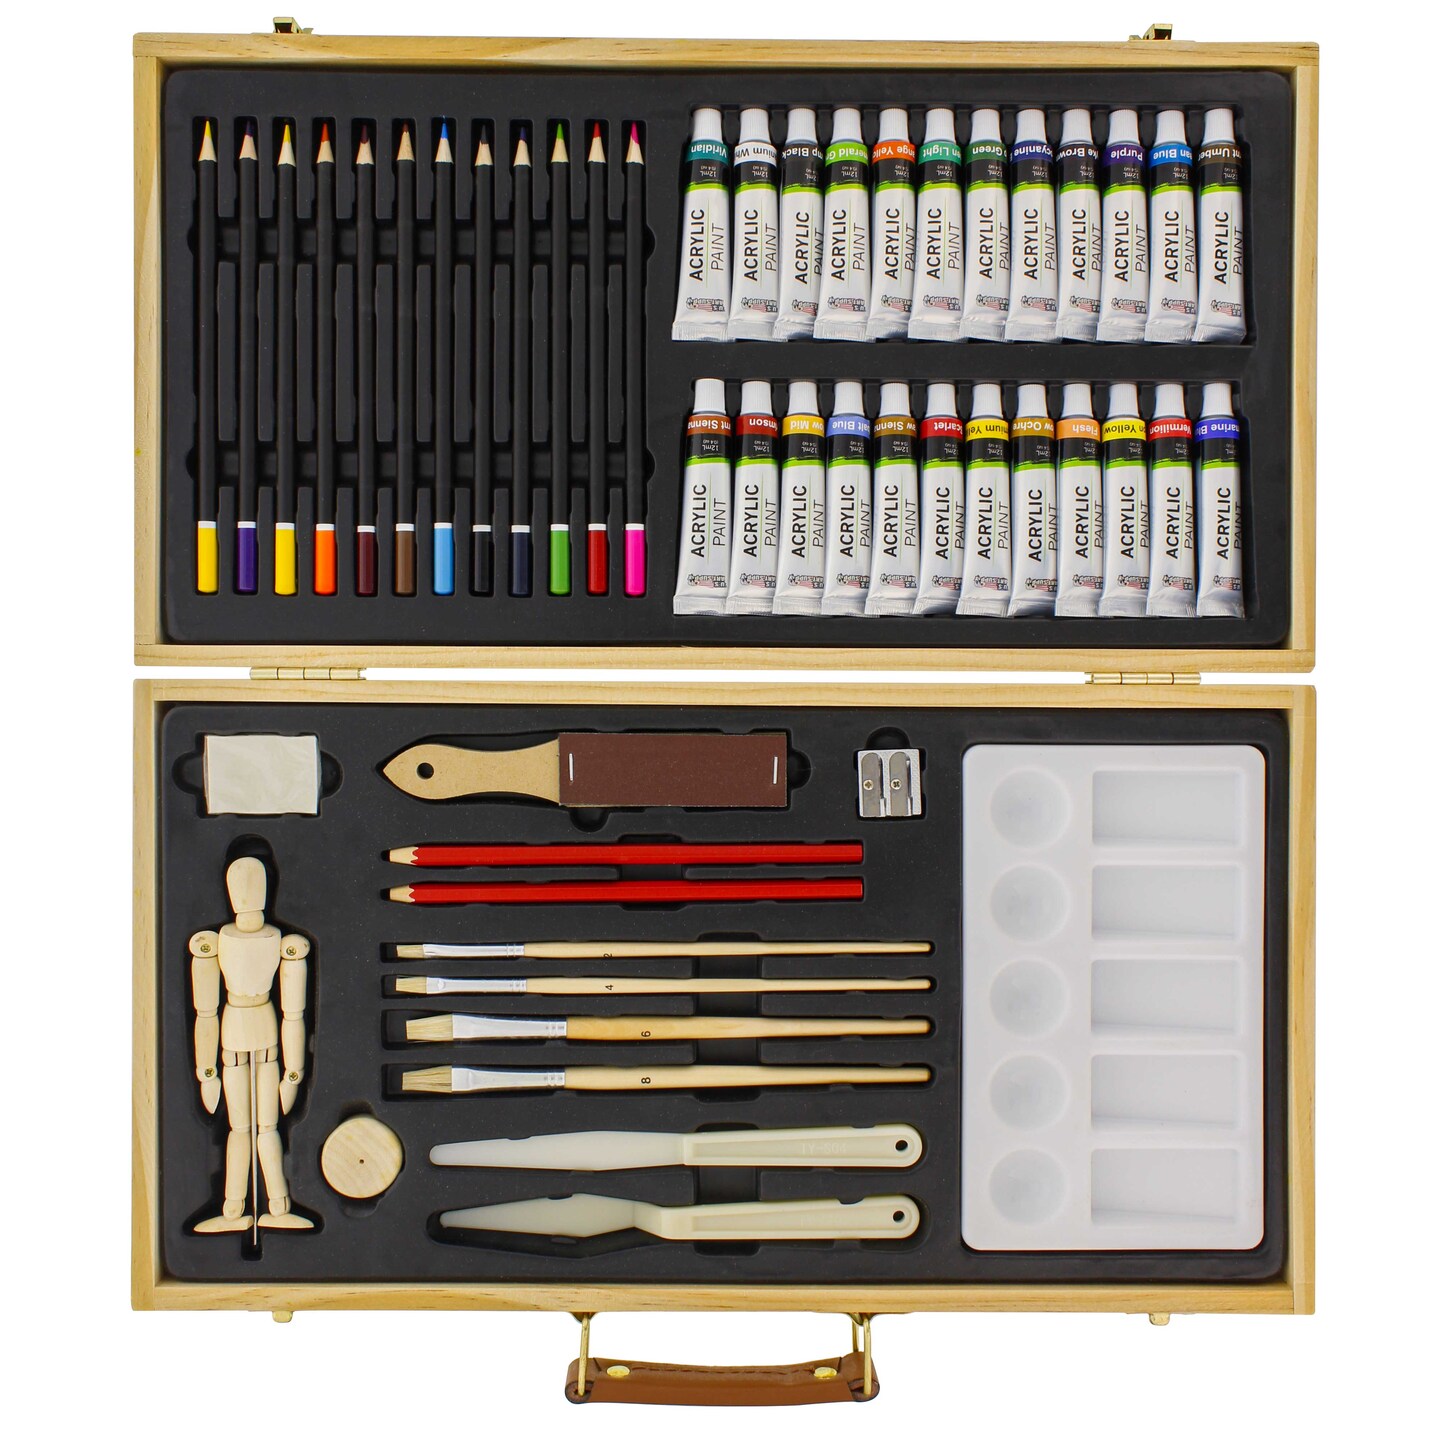 Buy Shuttle Art Sketching and Drawing Pencils Set, 37-Piece Professional  Sketch Pencils Set in Zipper Carry Case, Drawing Kit Art Supplies with  Graphite Charcoal Sticks Tool Sketch book for Adults Kids Online